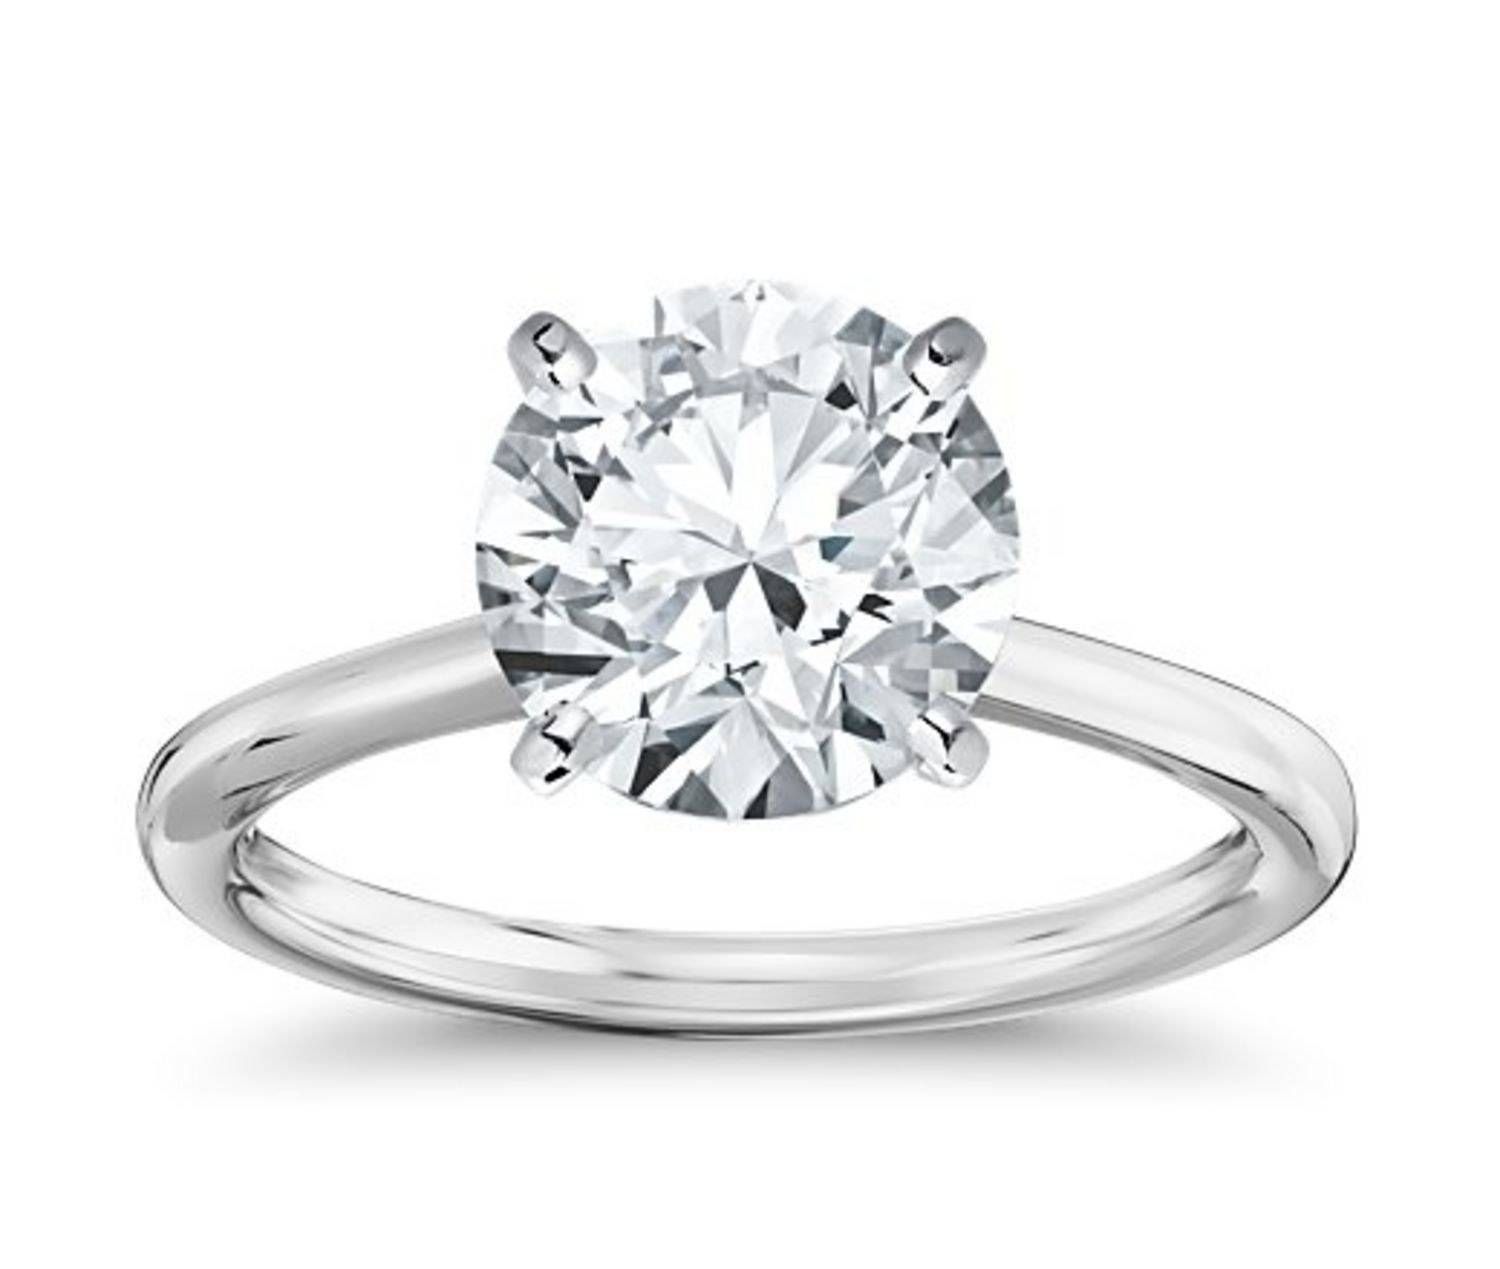 Lauren Conrad's Engagement Ring: 5 Sparklers Inspiredthe Bling Inside Engagement And Wedding Rings In One (View 3 of 15)